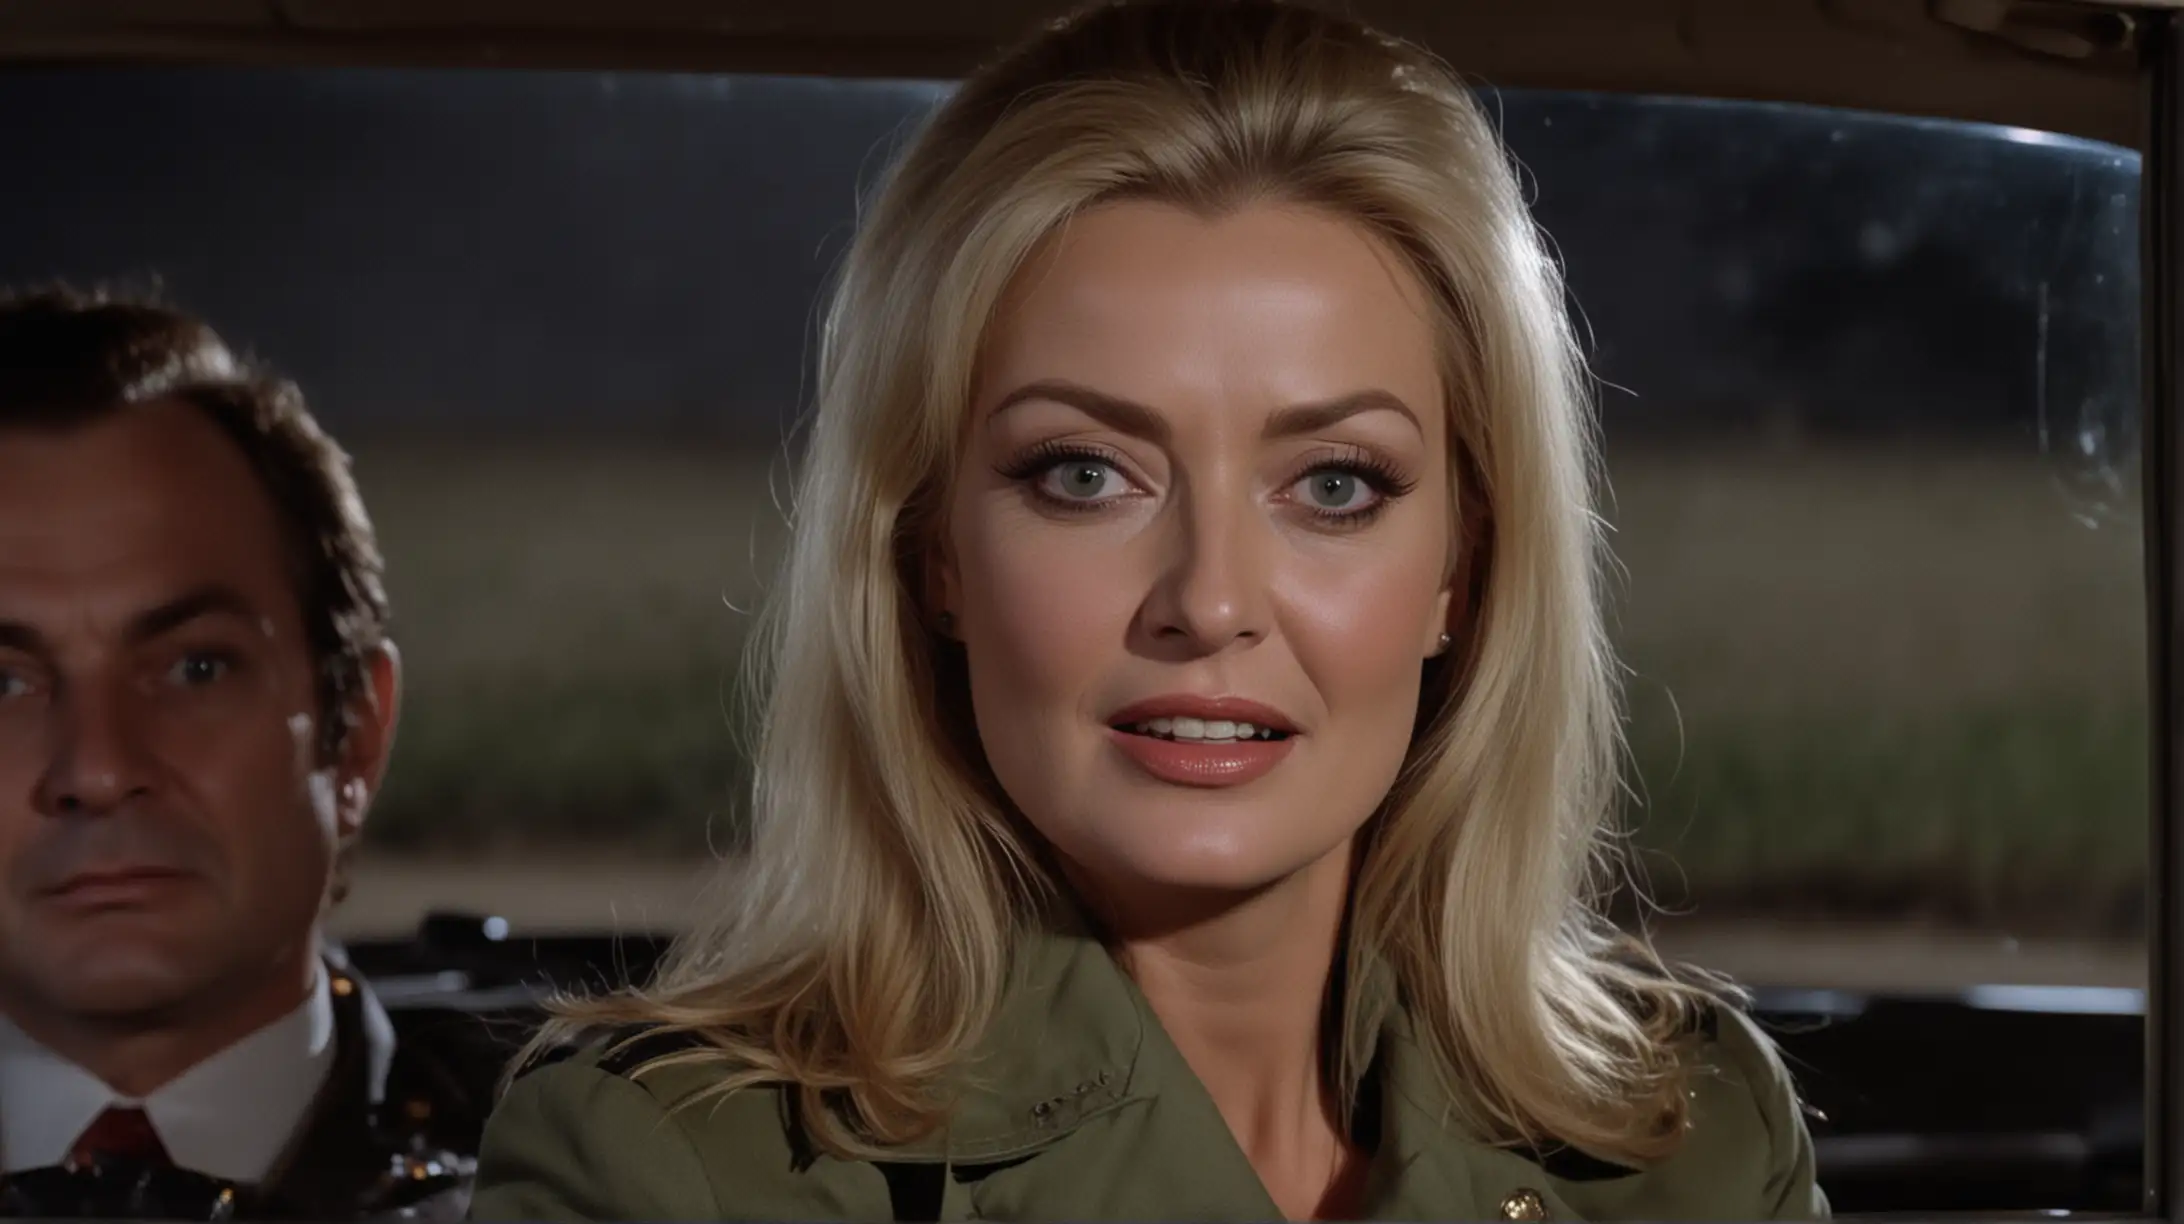 high ranking military Barbara Bouchet, 55 yo, blonde,  scar on face, military jacket, psycho smirk, angry, mad, furious, crazy eyes, backseat in presidential car, night, 70s crime movie style, super panavision 70